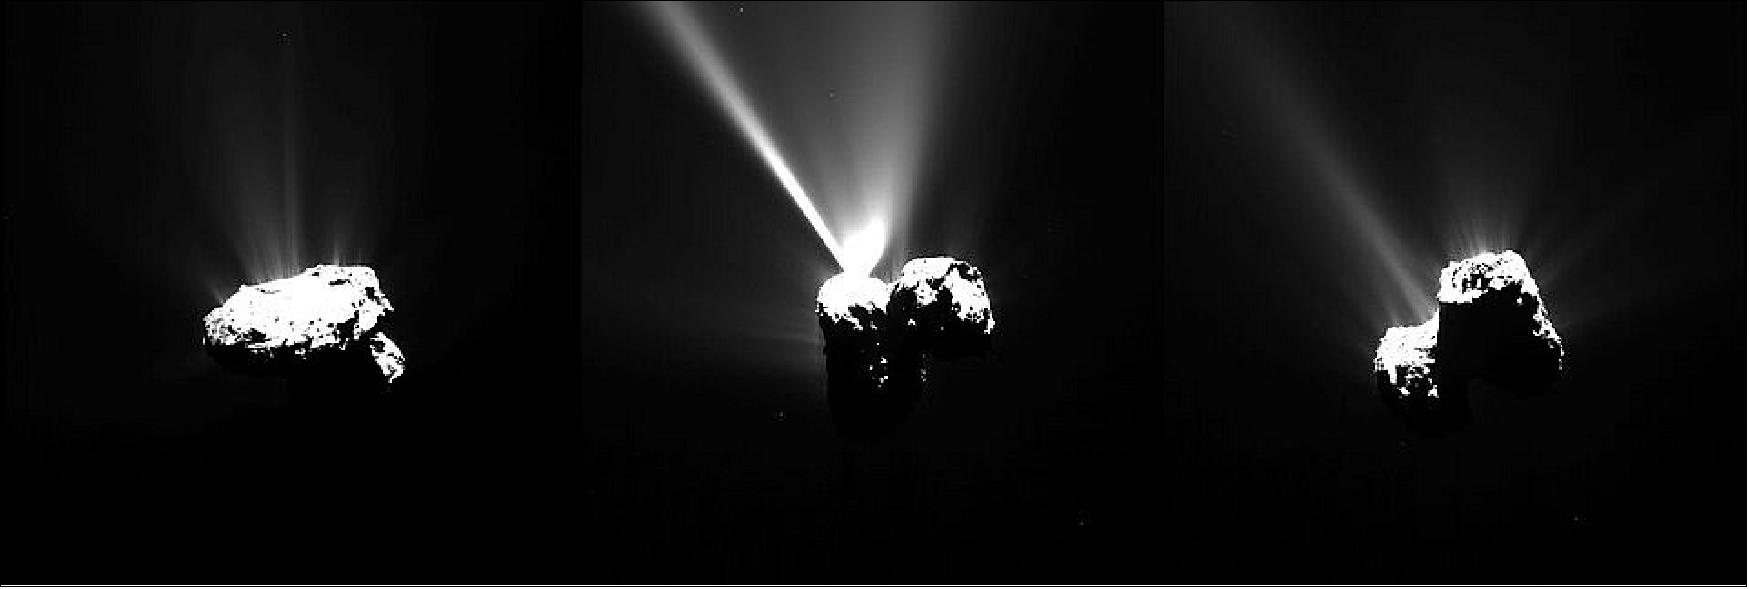 Figure 32: Approaching perihelion. This series of images of Comet 67P/Churyumov–Gerasimenko was captured by Rosetta’s OSIRIS narrow-angle camera on 12 August 2015, just a few hours before the comet reached the closest point to the Sun along its 6.5-year orbit, or perihelion. The image at left was taken at 14:07 GMT, the middle image at 17:35 GMT, and the final image at 23:31 GMT. The images were taken from a distance of about 330 km from the comet. The comet’s activity, at its peak intensity around perihelion and in the weeks that follow, is clearly visible in these spectacular images. In particular, a significant outburst can be seen in the image captured at 17:35 GMT (image credit: ESA/Rosetta/MPS for OSIRIS Team MPS/UPD/LAM/IAA/SSO/INTA/UPM/DASP/ID)